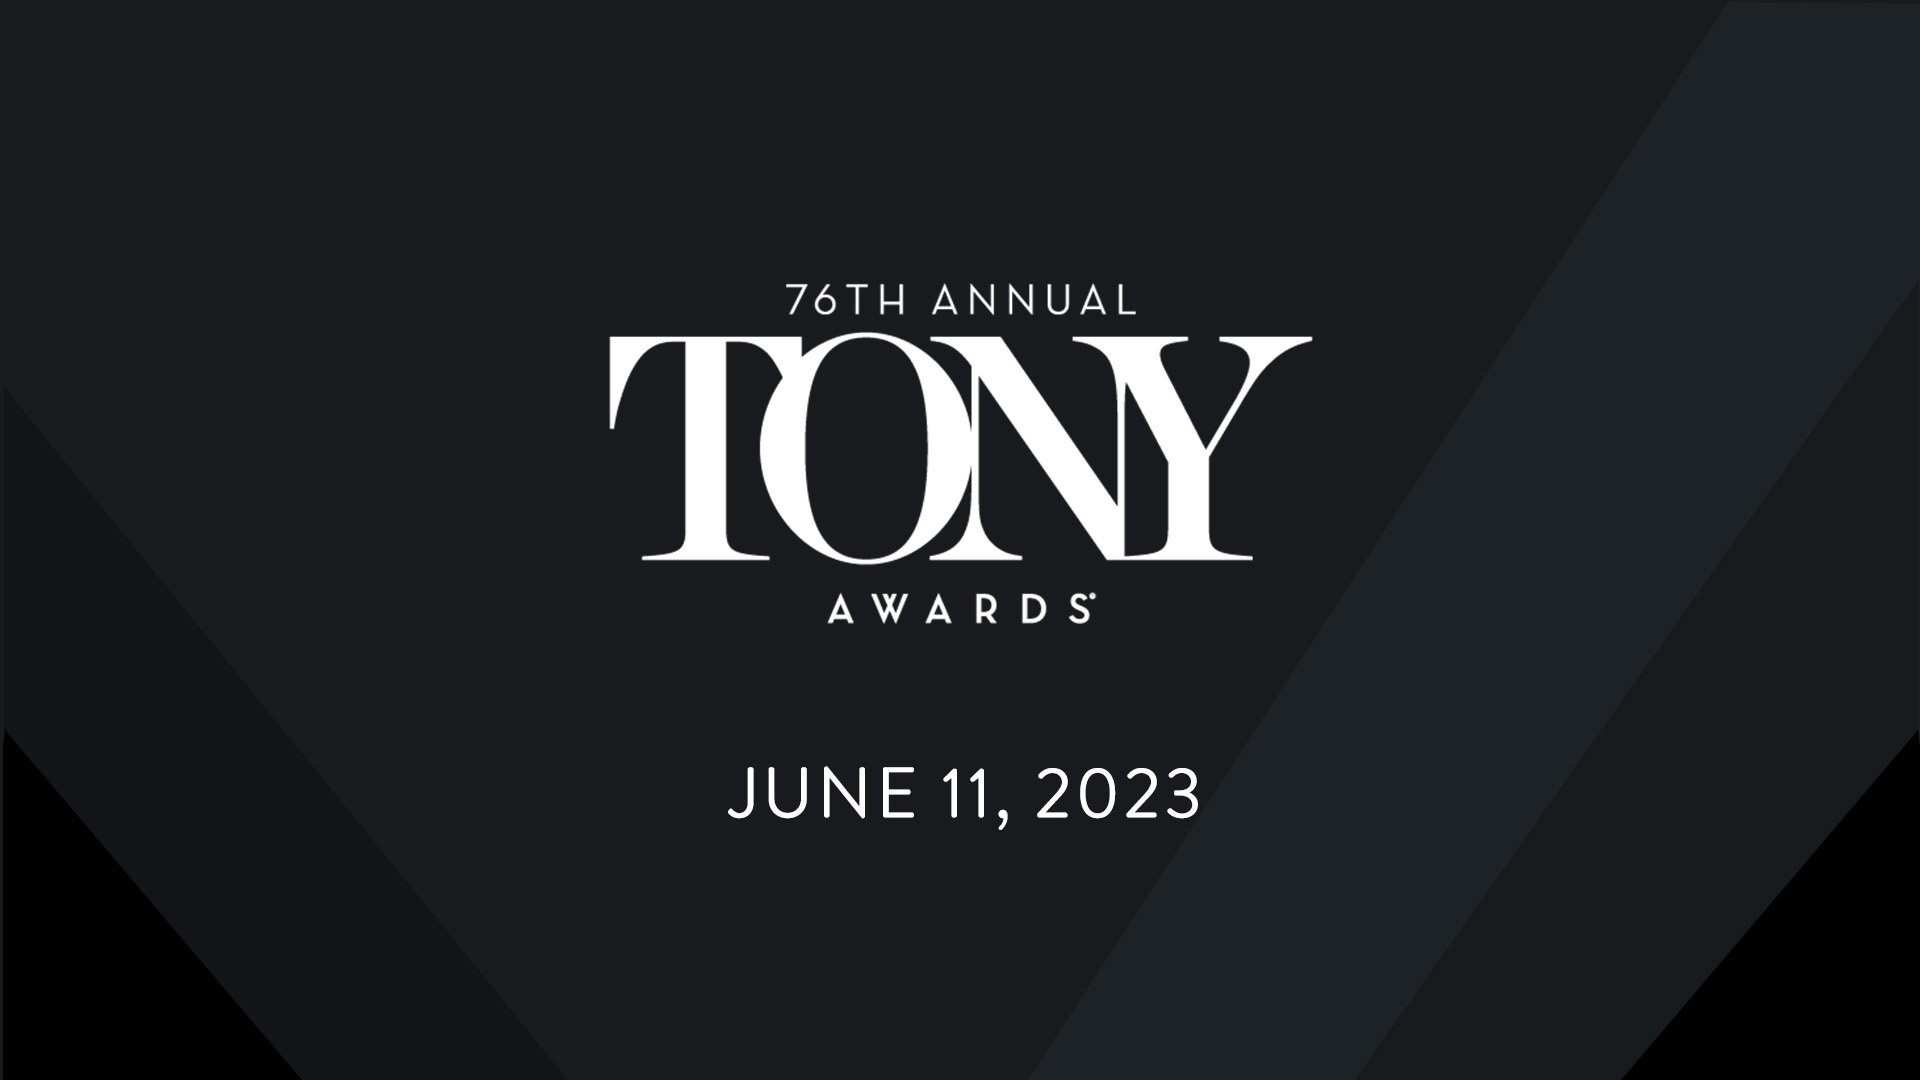 The American Theatre Wing’s 76th Annual Tony Awards®